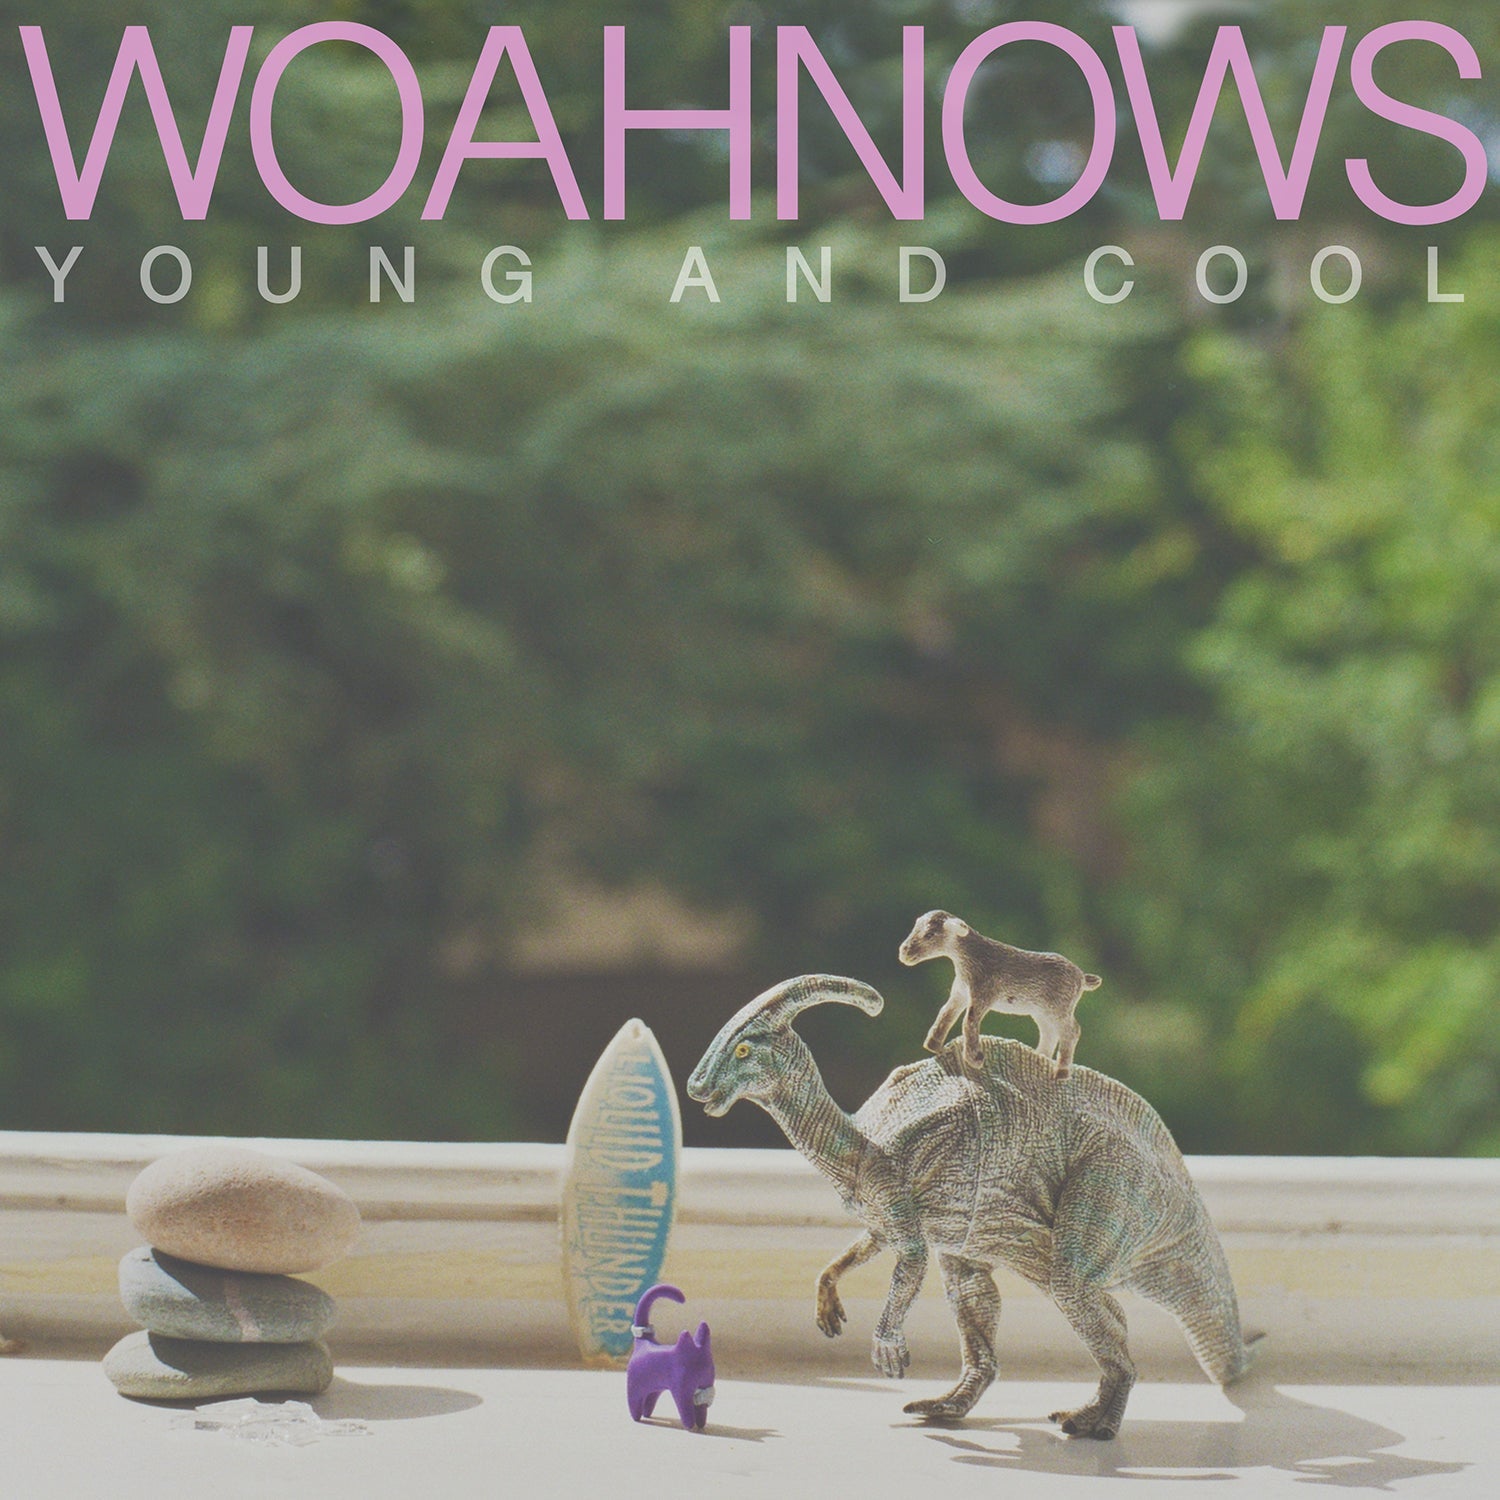 Woahnows - Young and Cool LP - Vinyl - Specialist Subject Records